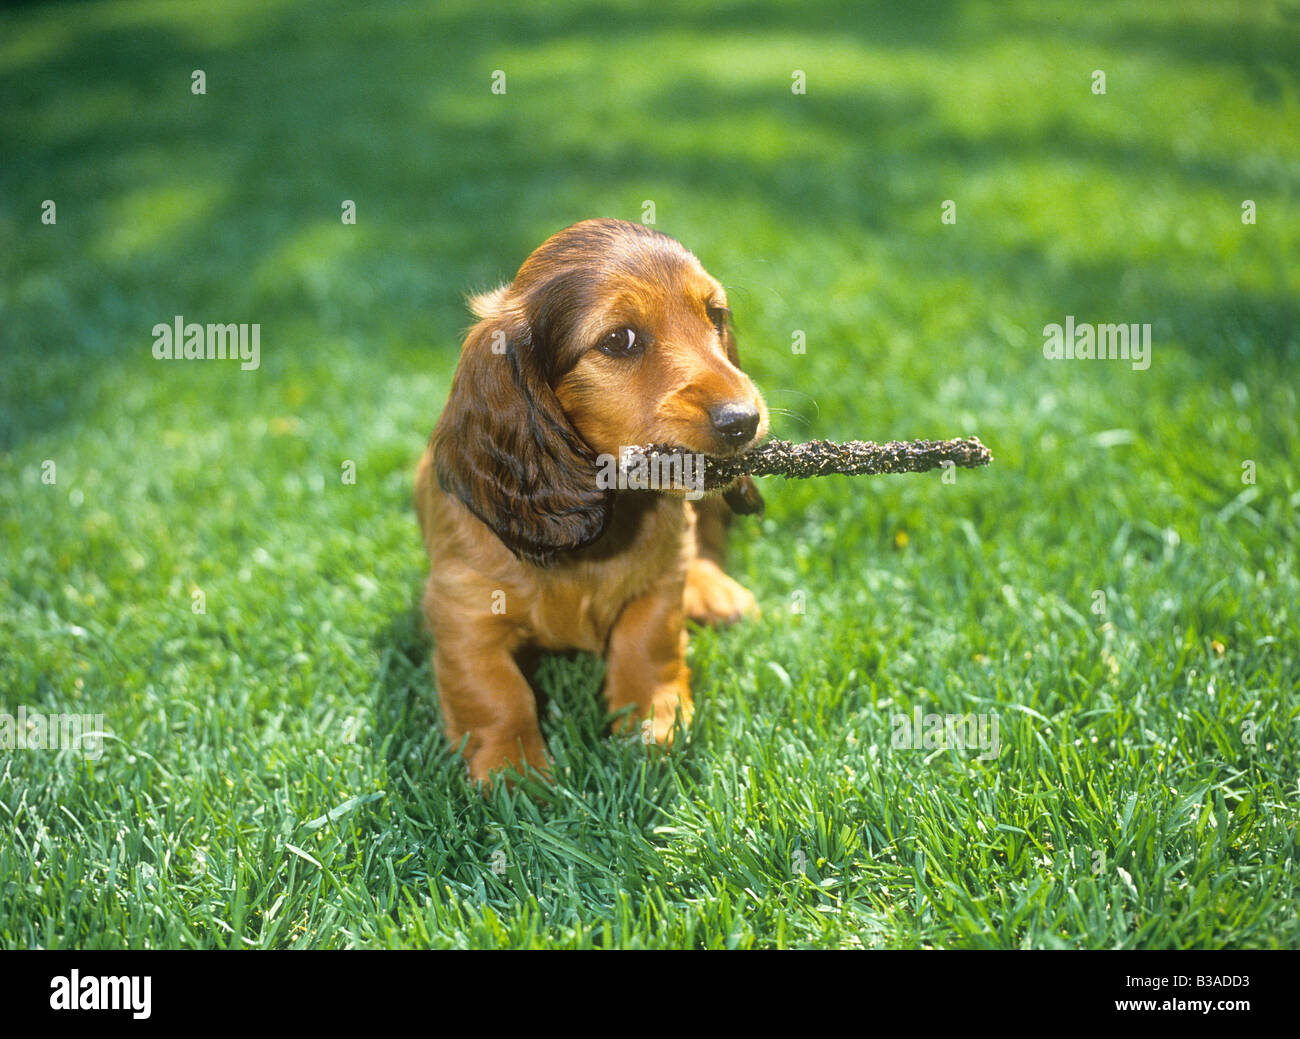 longhaired dachshund puppy with stick in muzzle Stock Photo